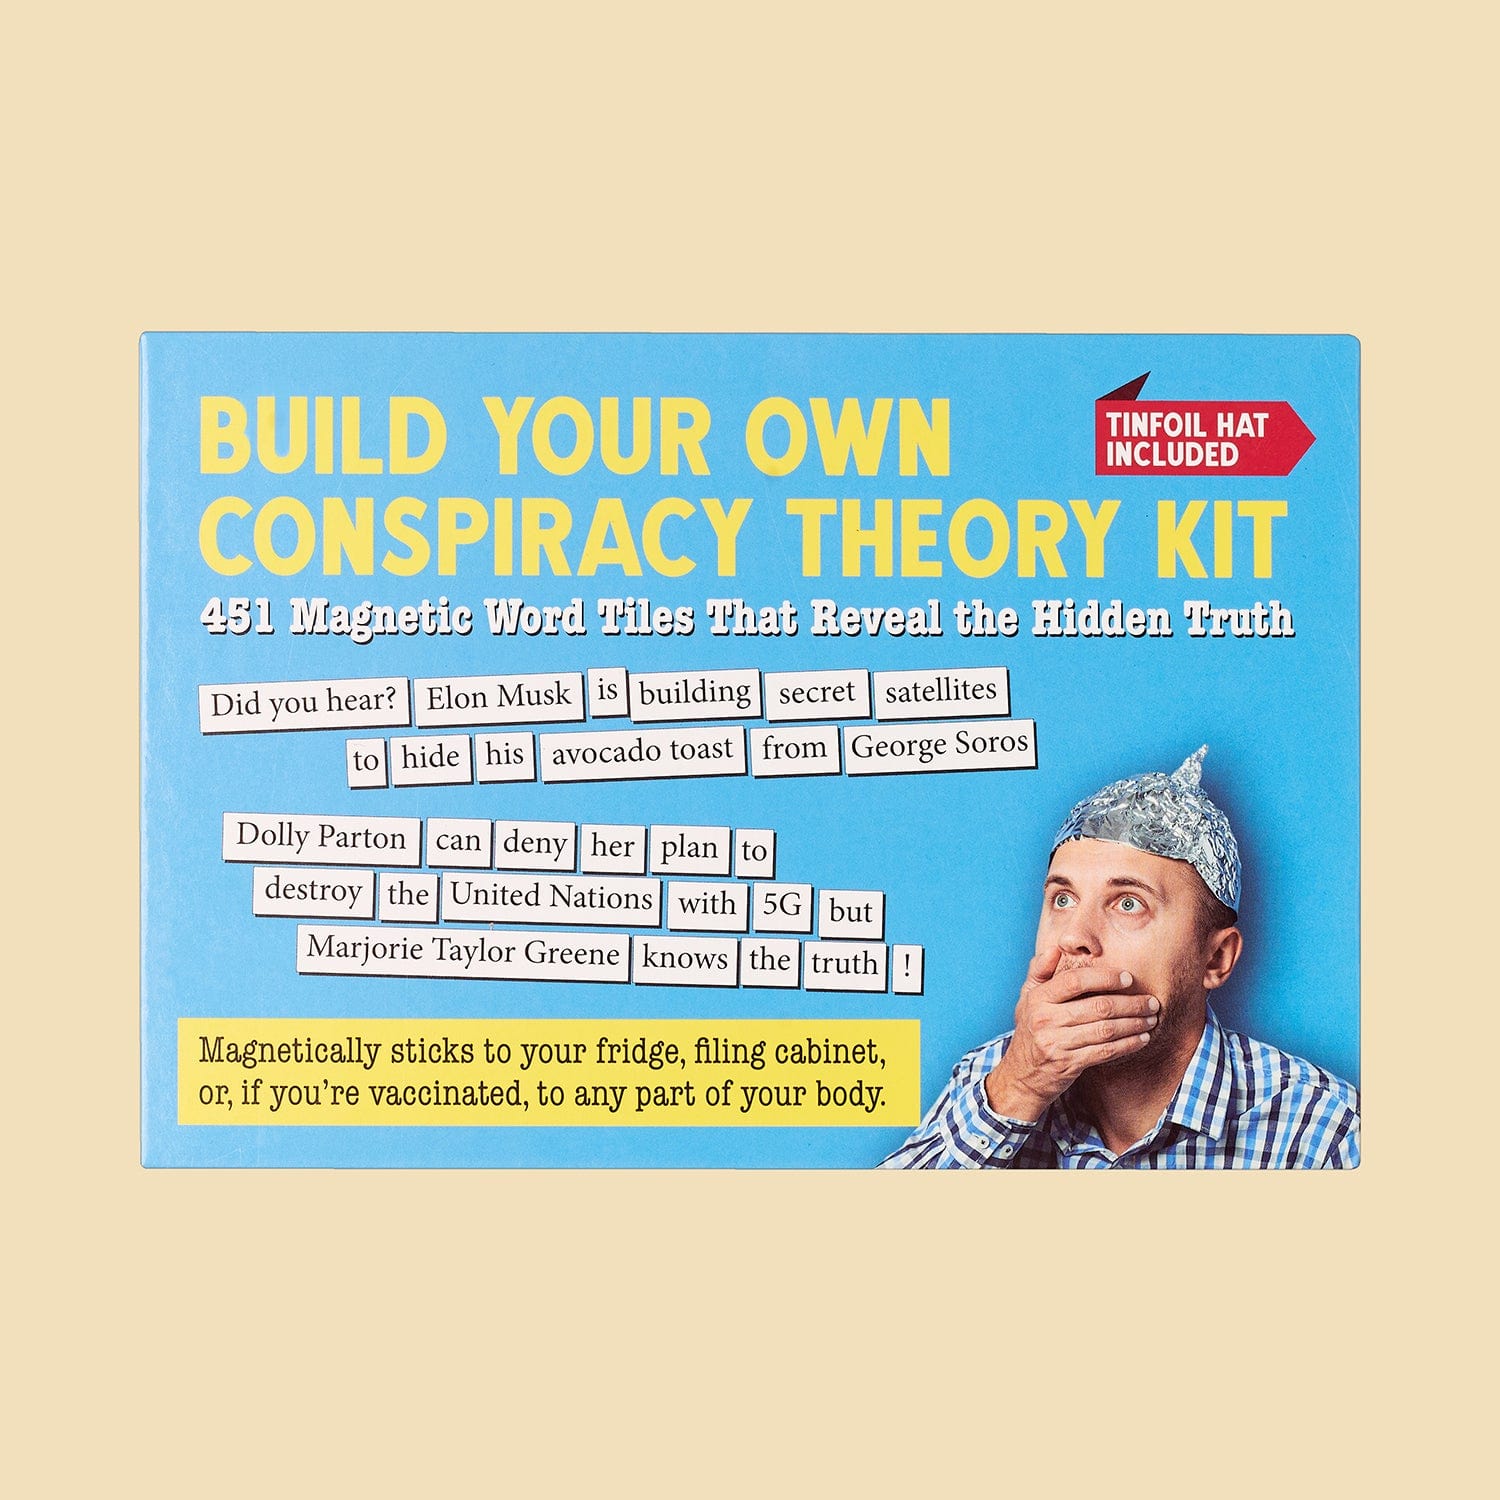 Dissent Pins build your own conspiracy theory kit - funny fridge magnet  word games for adults (451 word tiles)